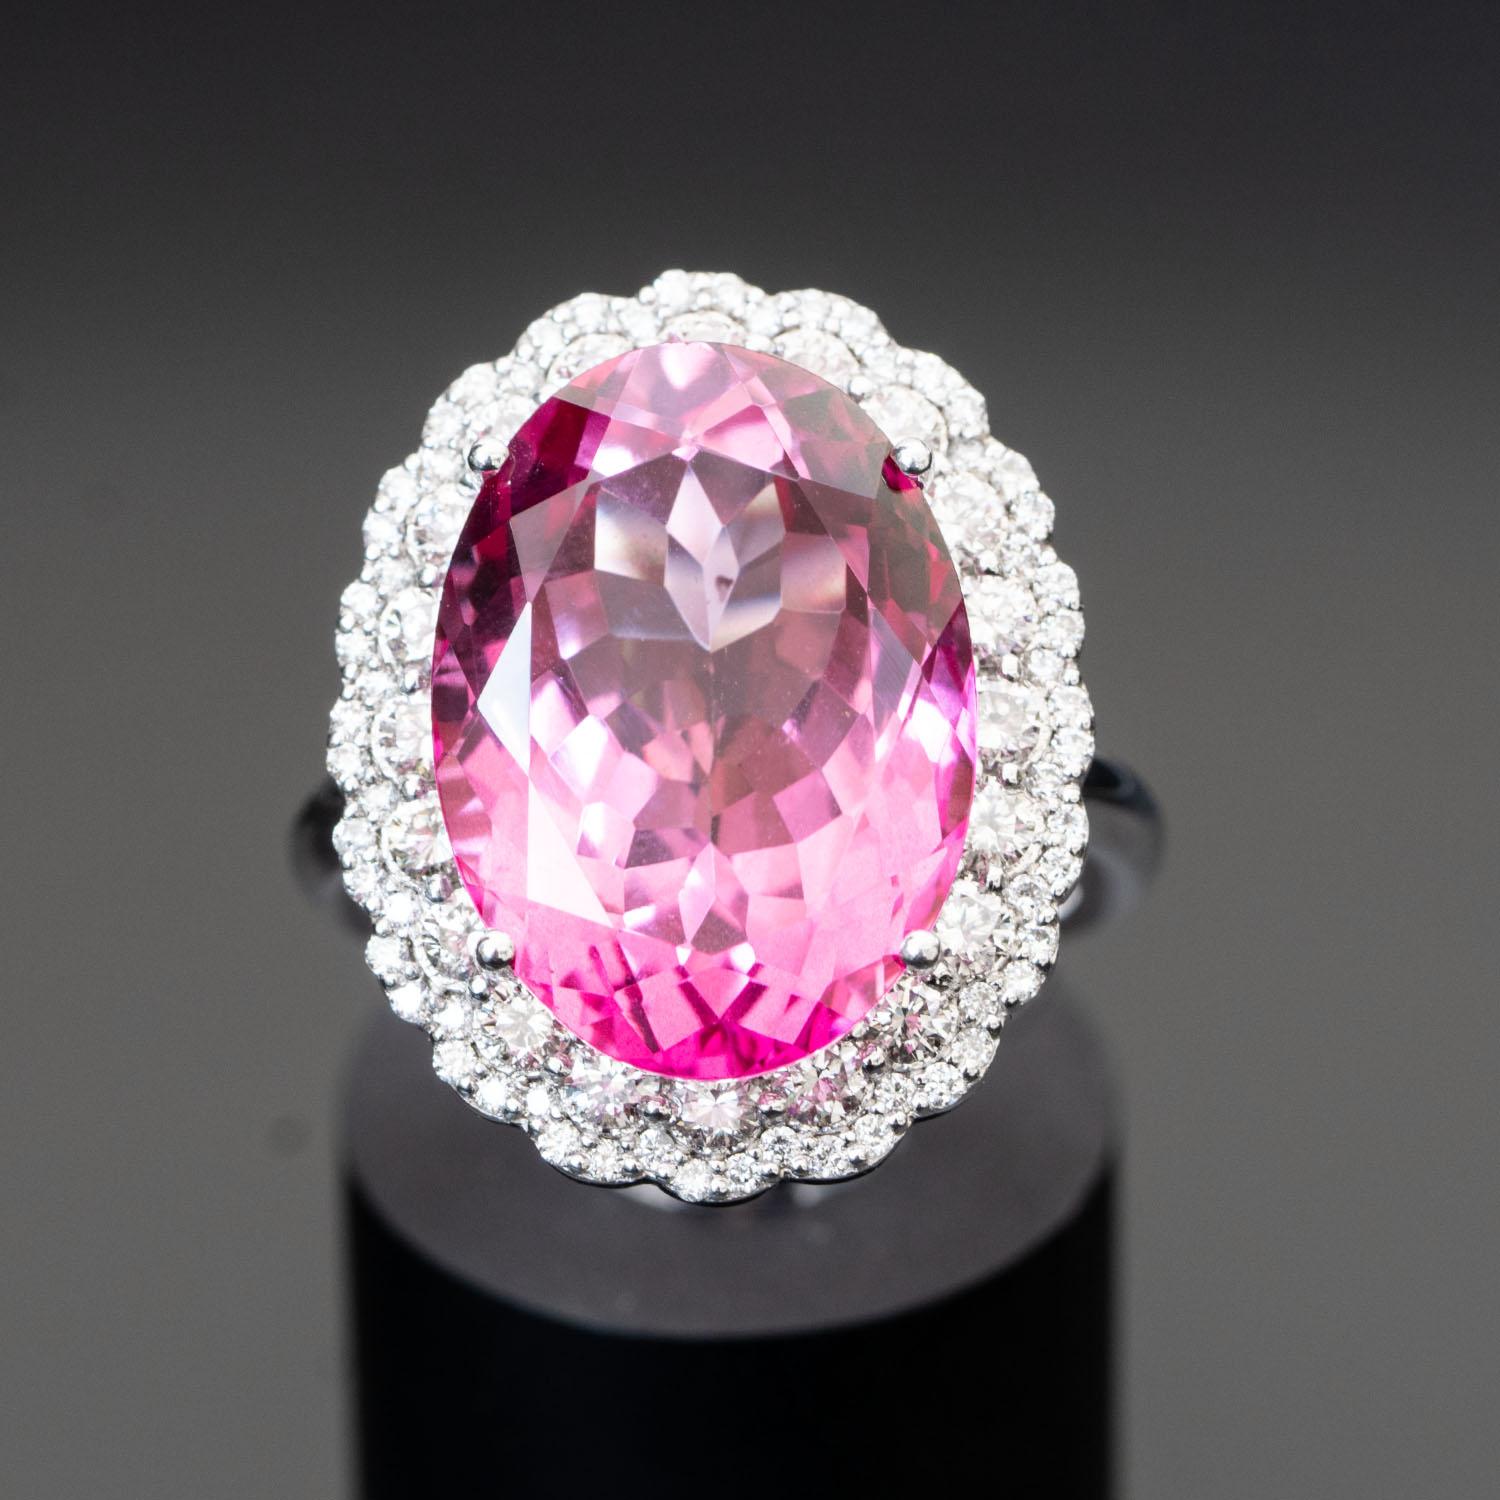 This gorgeous pink topaz ring will impress everyone around you. It features a large oval 20.00 carat gemstone, adorned with 1.20 carat natural diamonds.

Natural Topaz
Number of Stones:1
Shape & Cut:Oval
Carats Weight:20.79
Measurements: 18.02 X